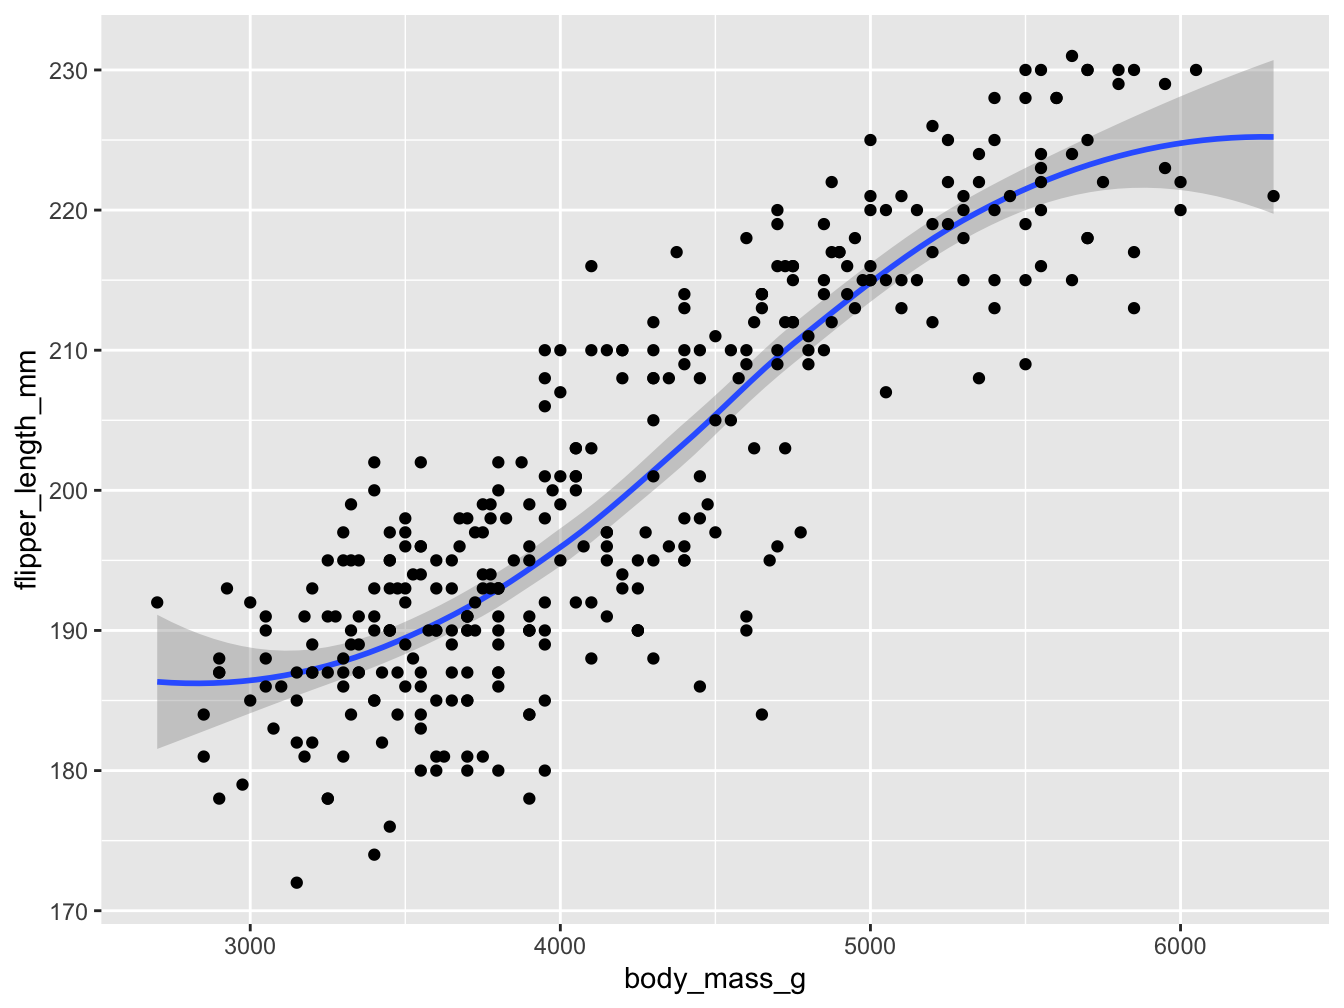 A basic trend and scatterplot combining geom_smooth() and geom_point().